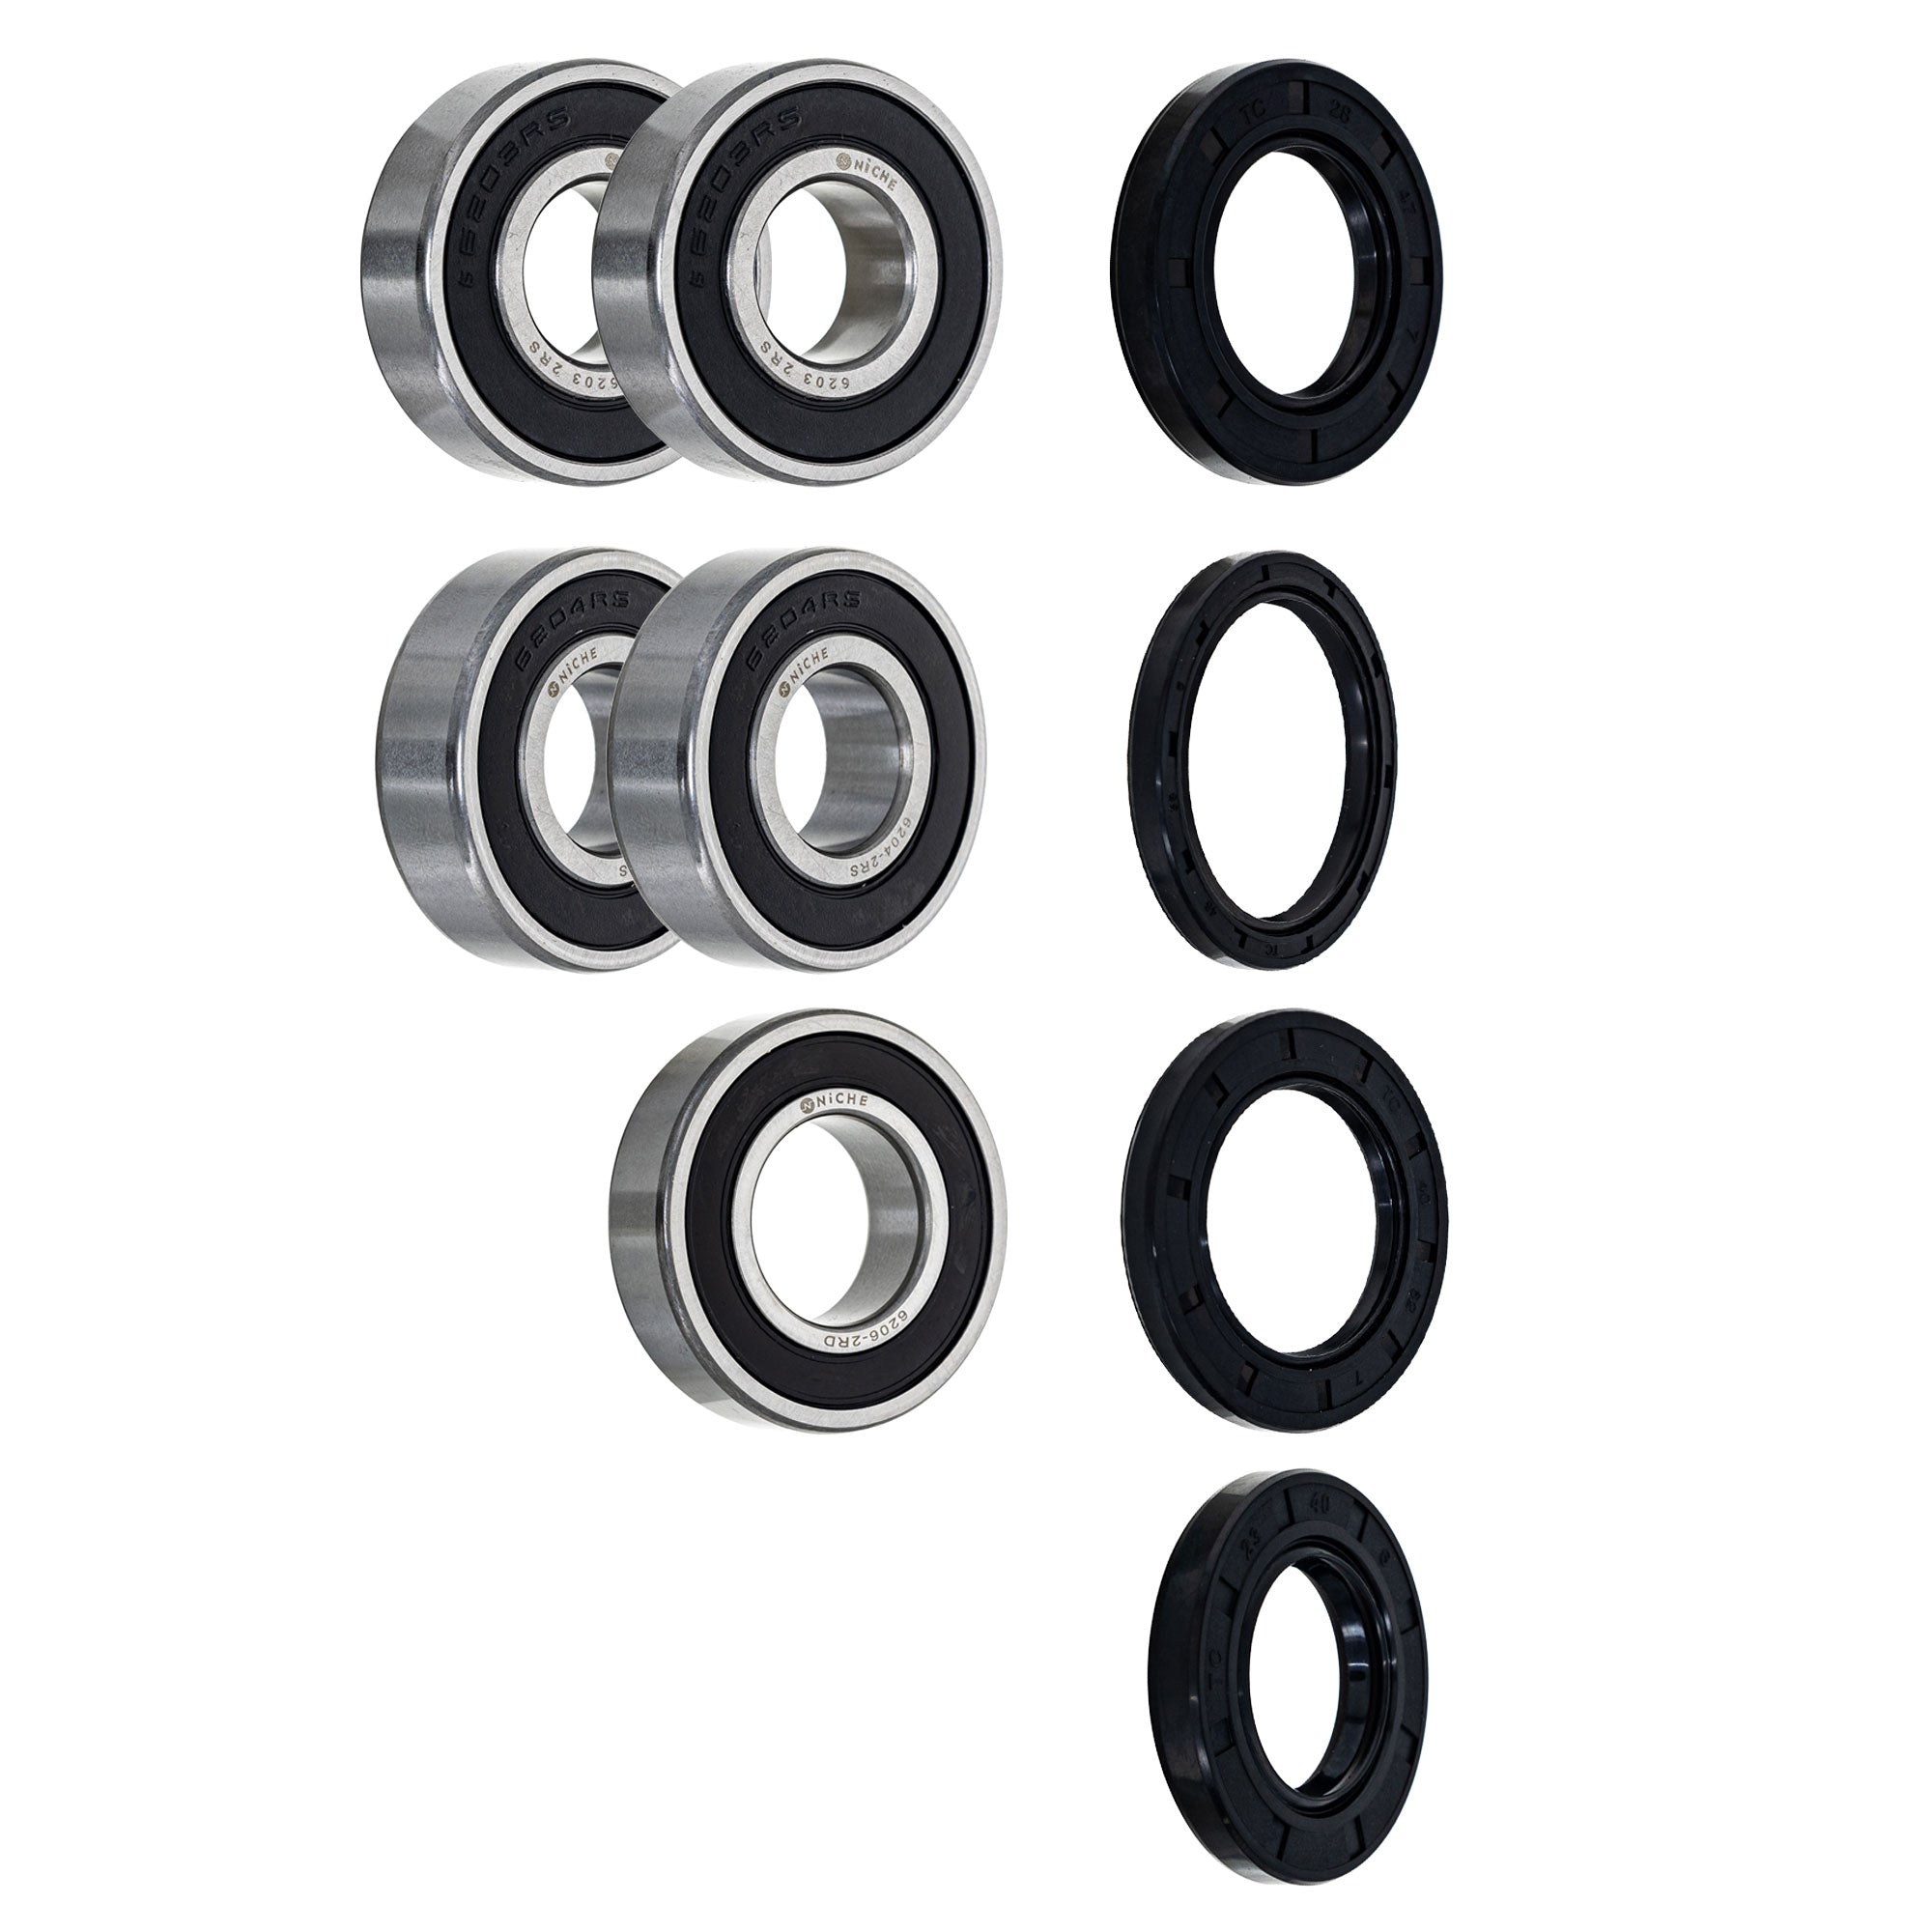 Wheel Bearing Seal Kit for zOTHER Ref No YZF600R NICHE MK1008649